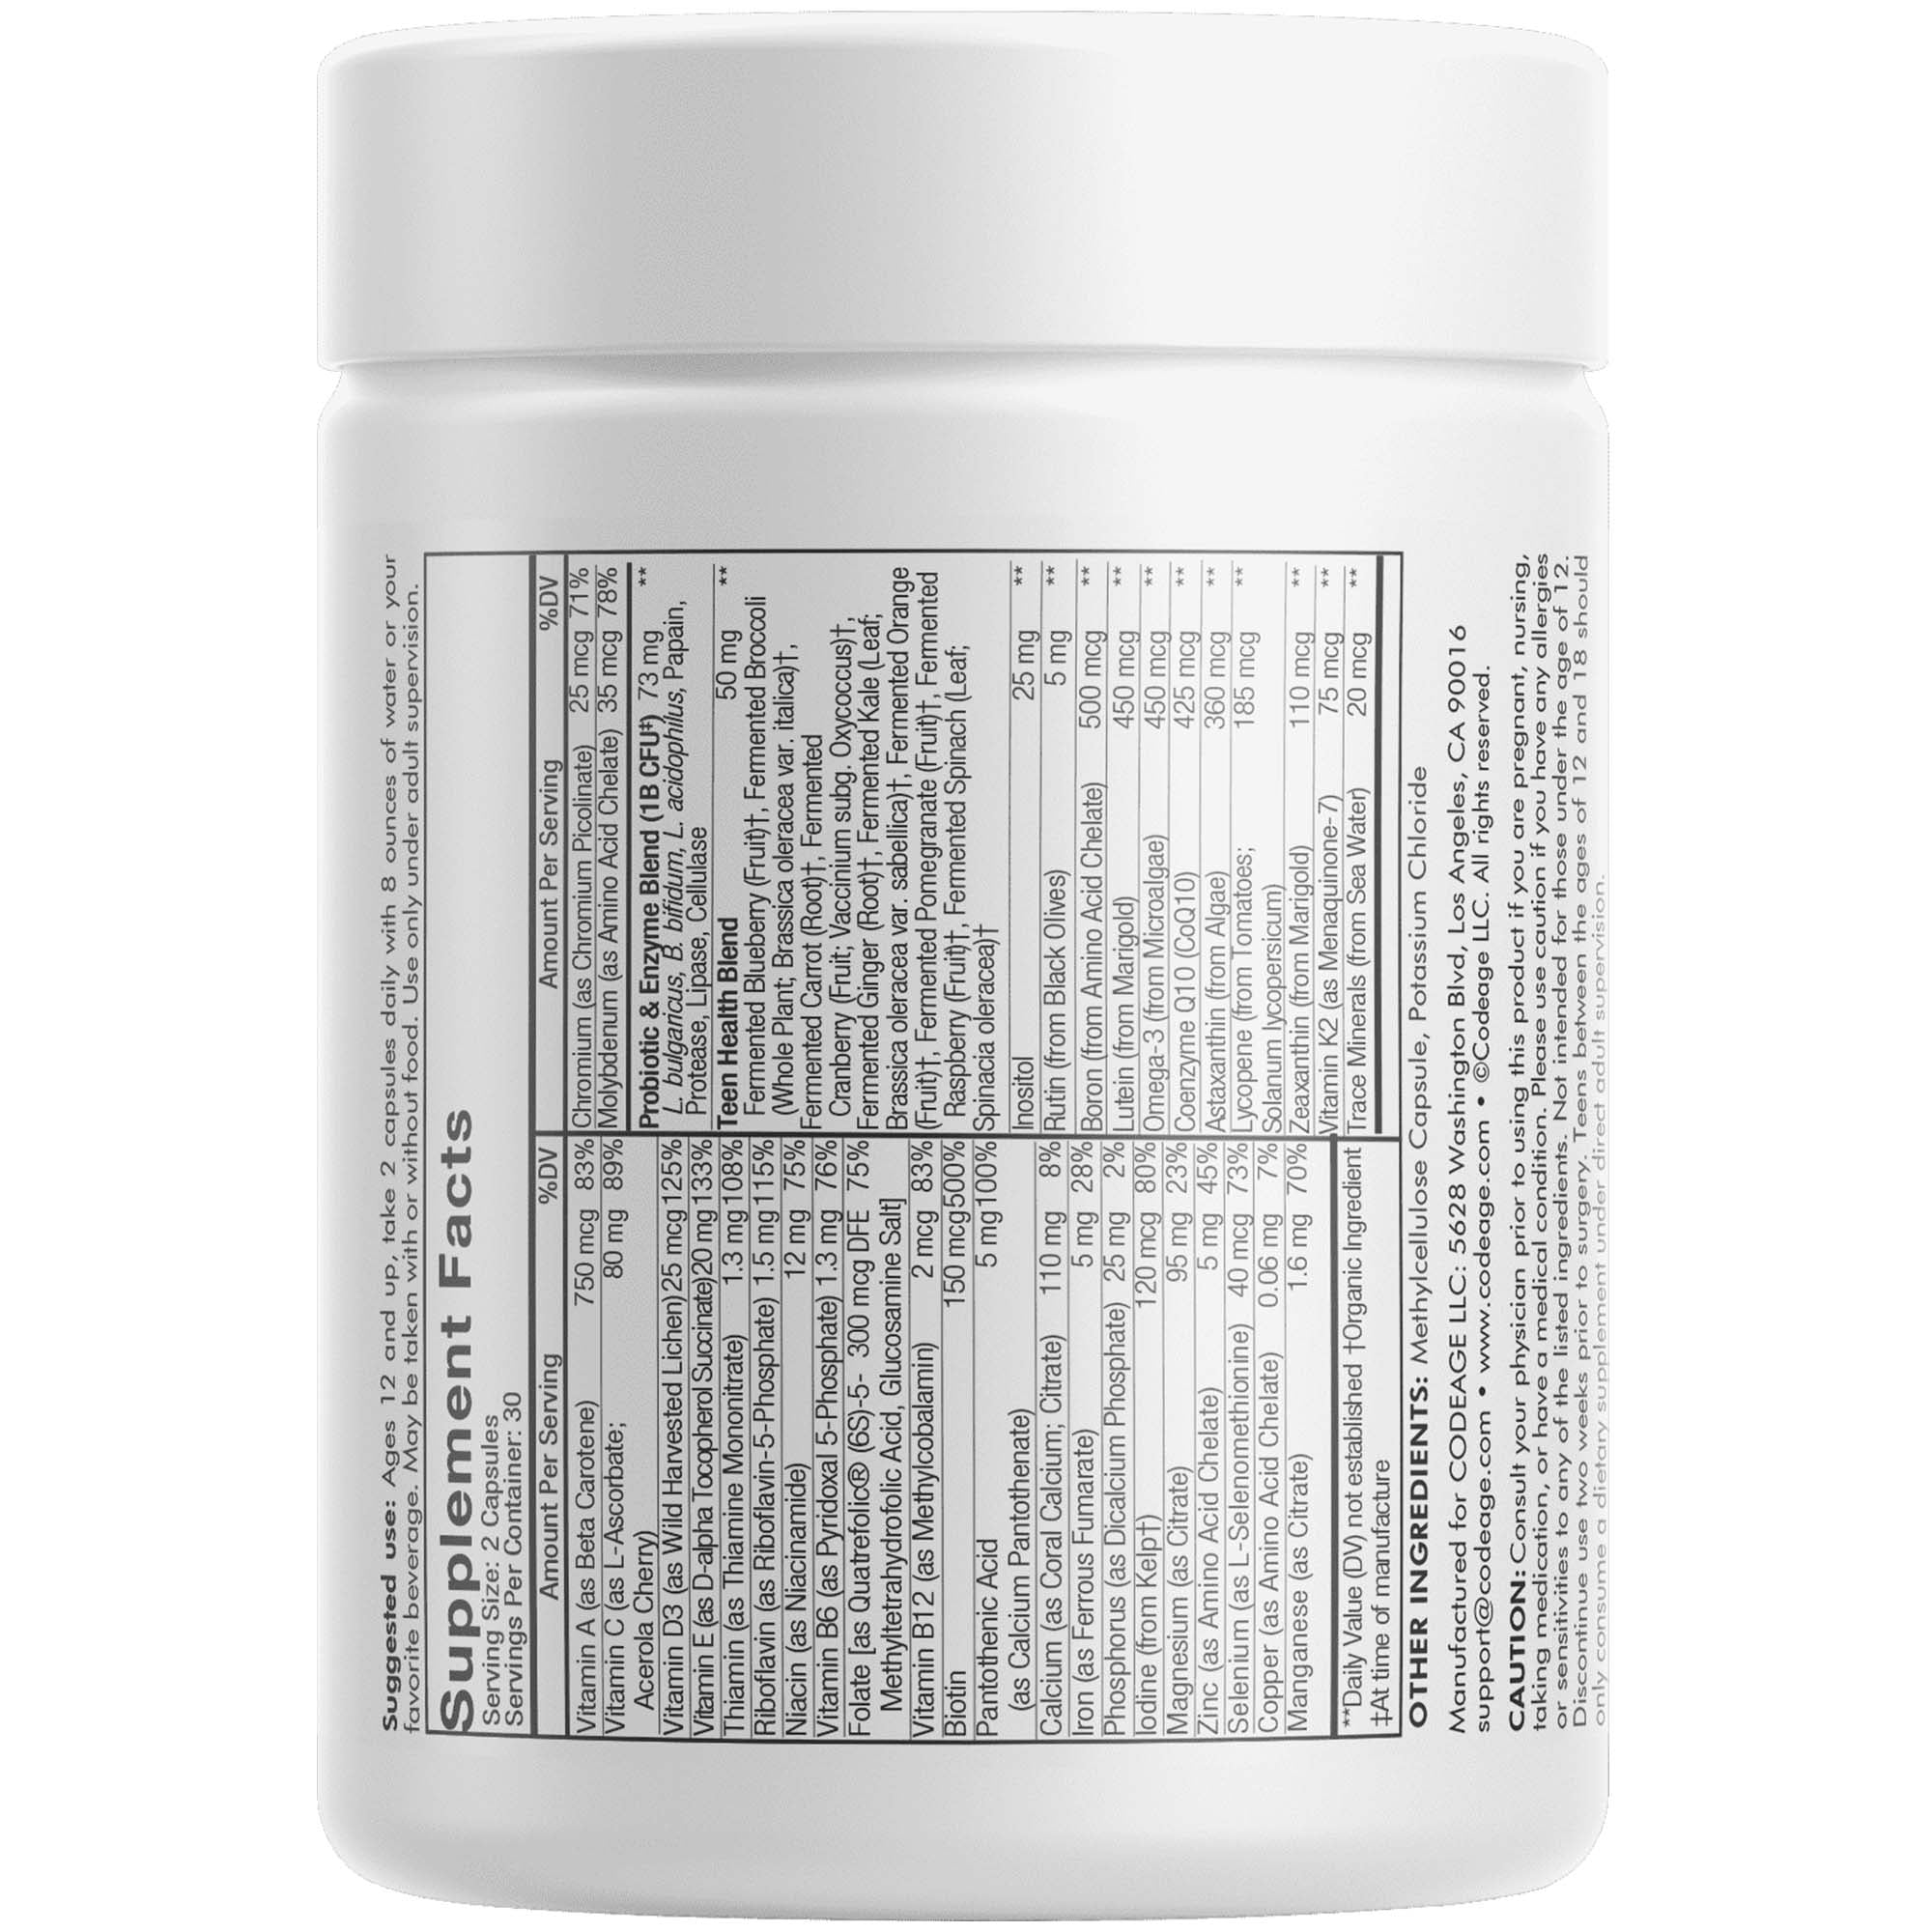 Teen's Daily Multivitamin by Codeage